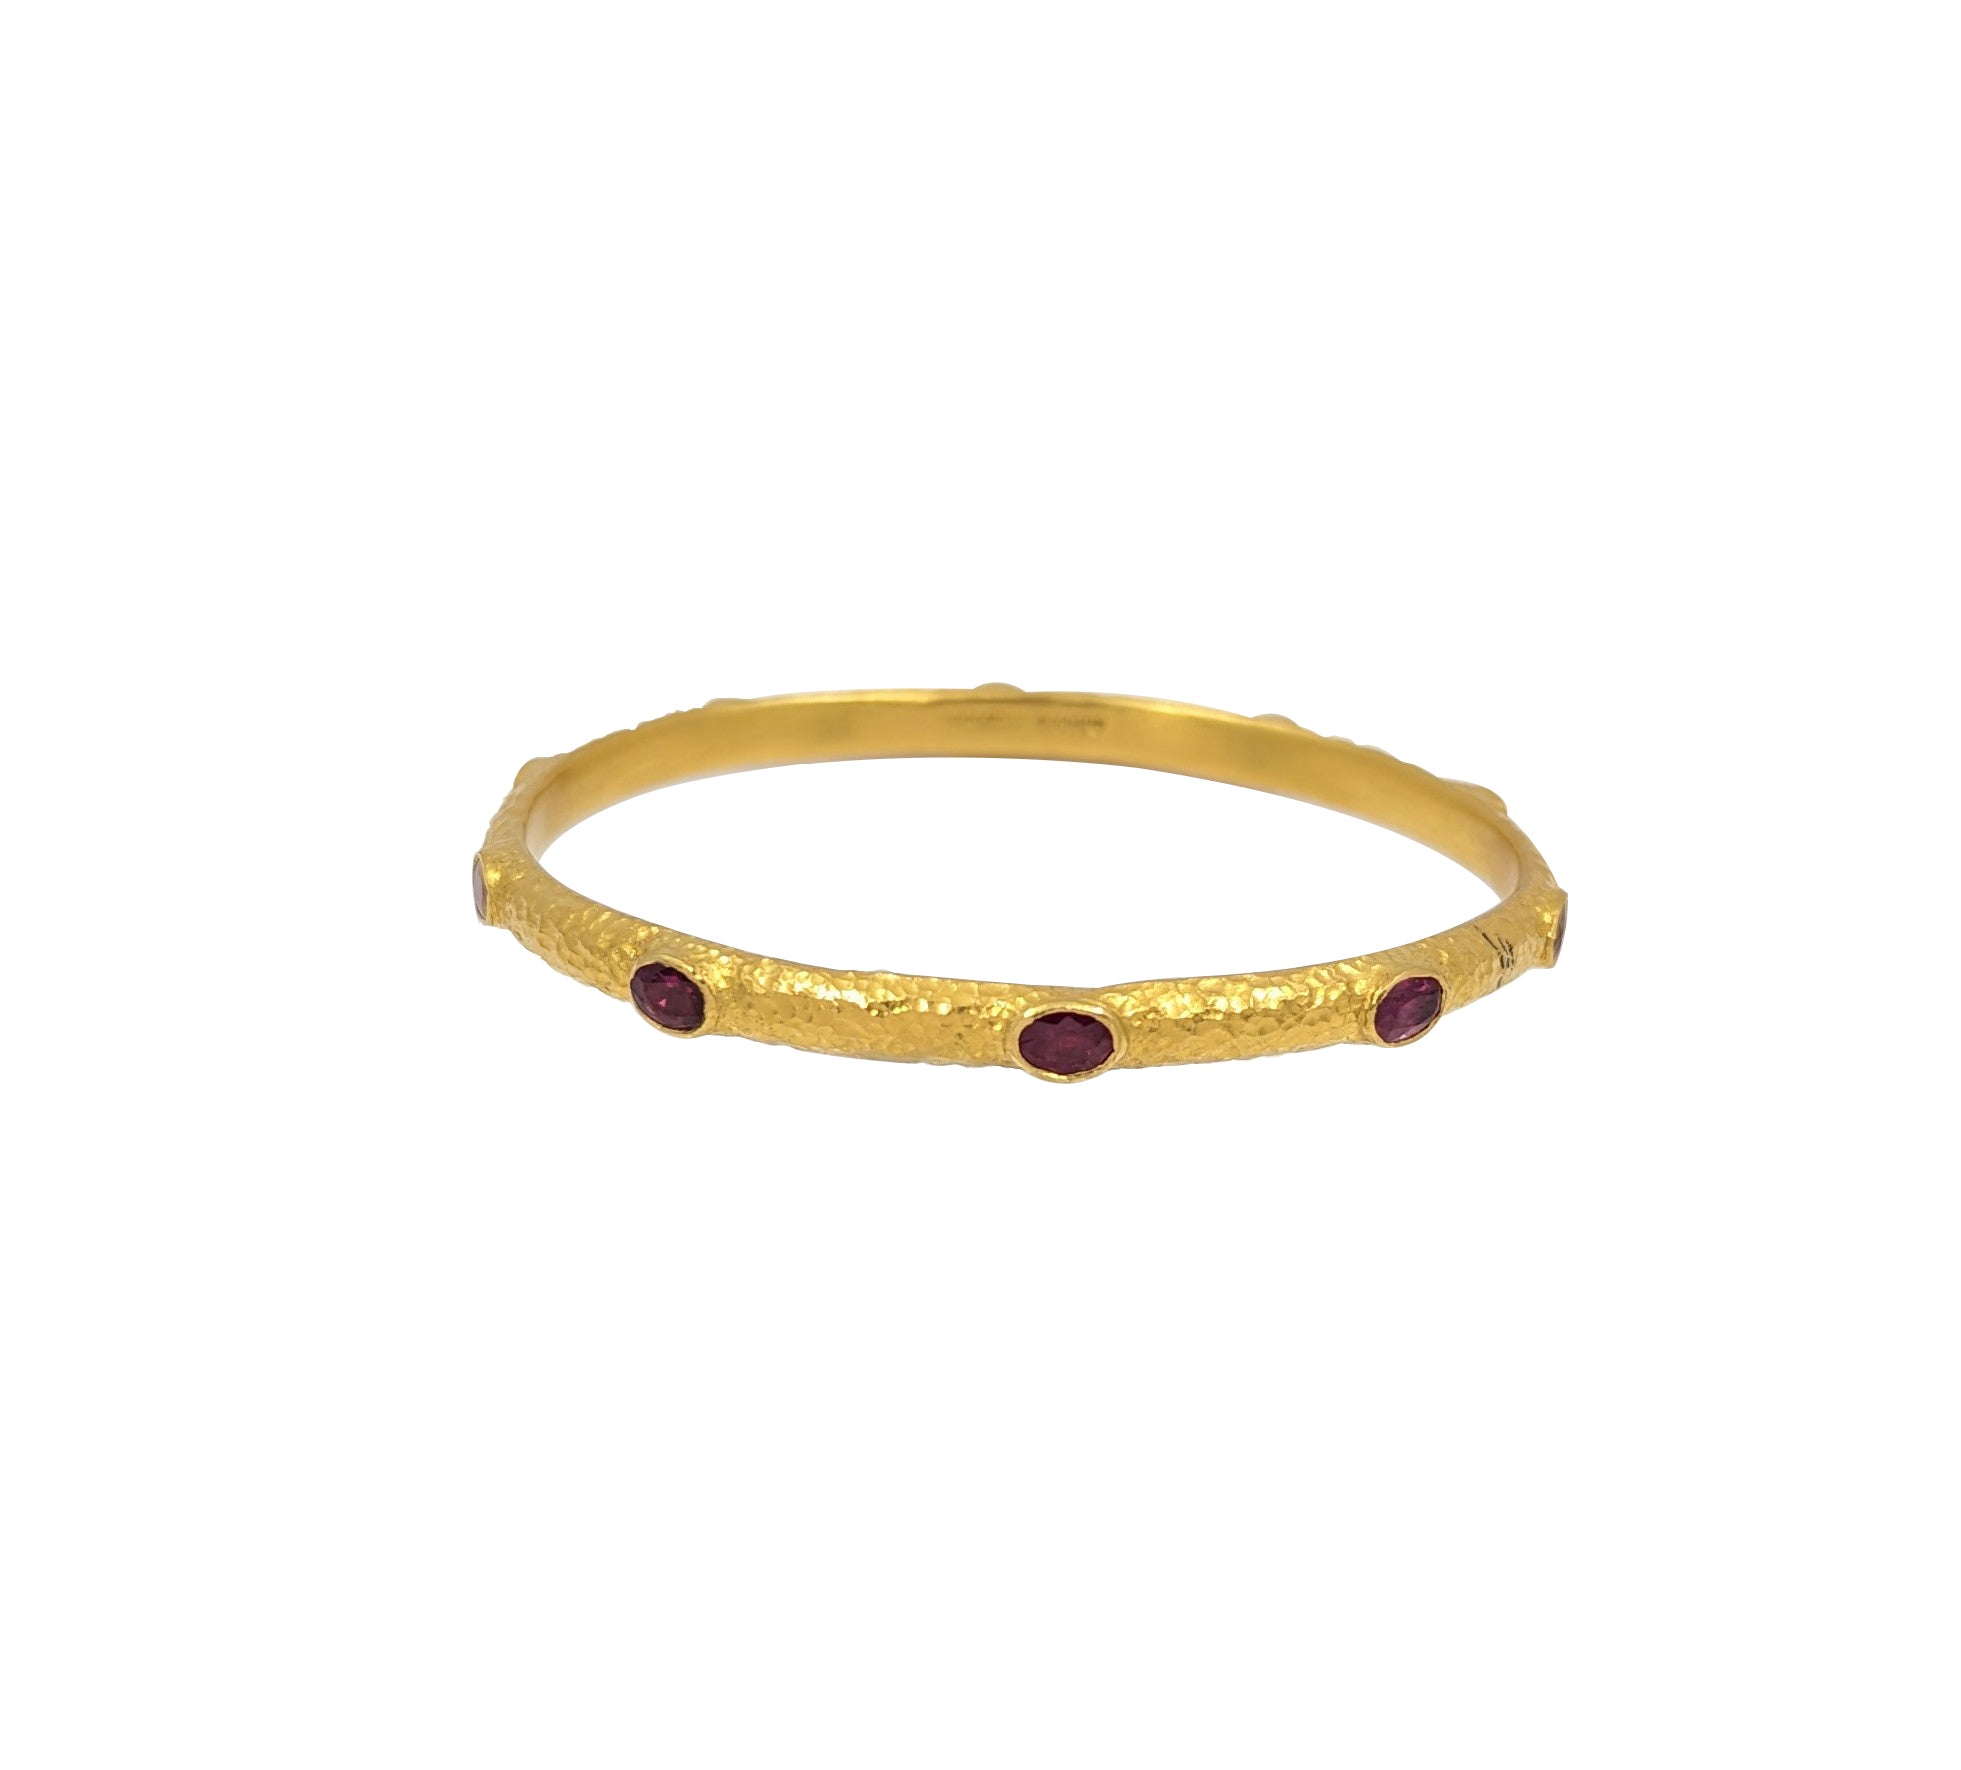 Handmade 23Kt Yellow Gold and Ruby Stone Bangle